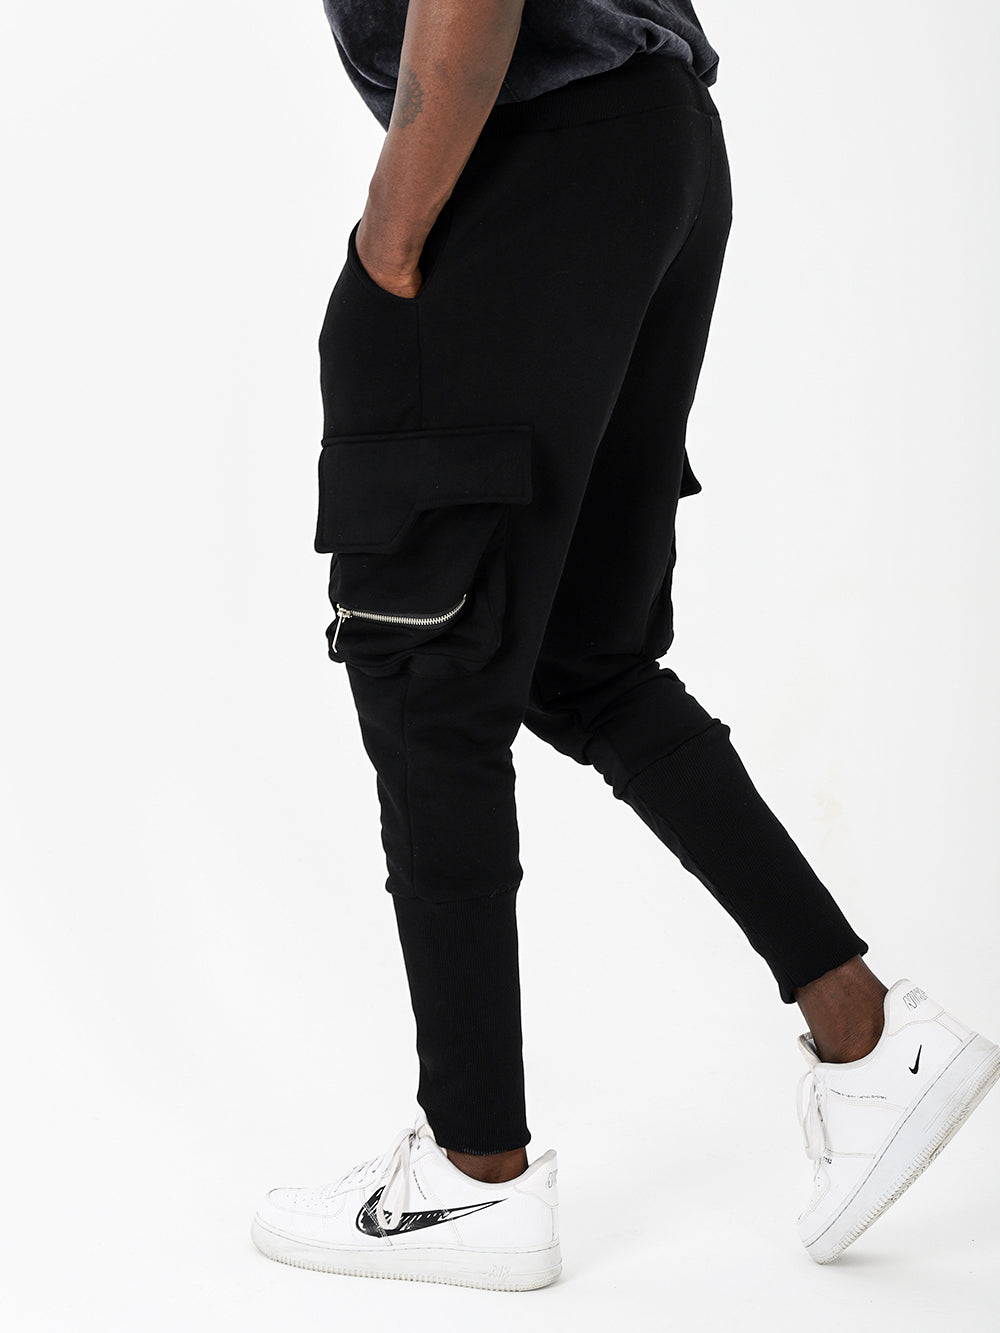 A man wearing black Rambo joggers, perfect for comfort and with plenty of pockets, paired with white sneakers.